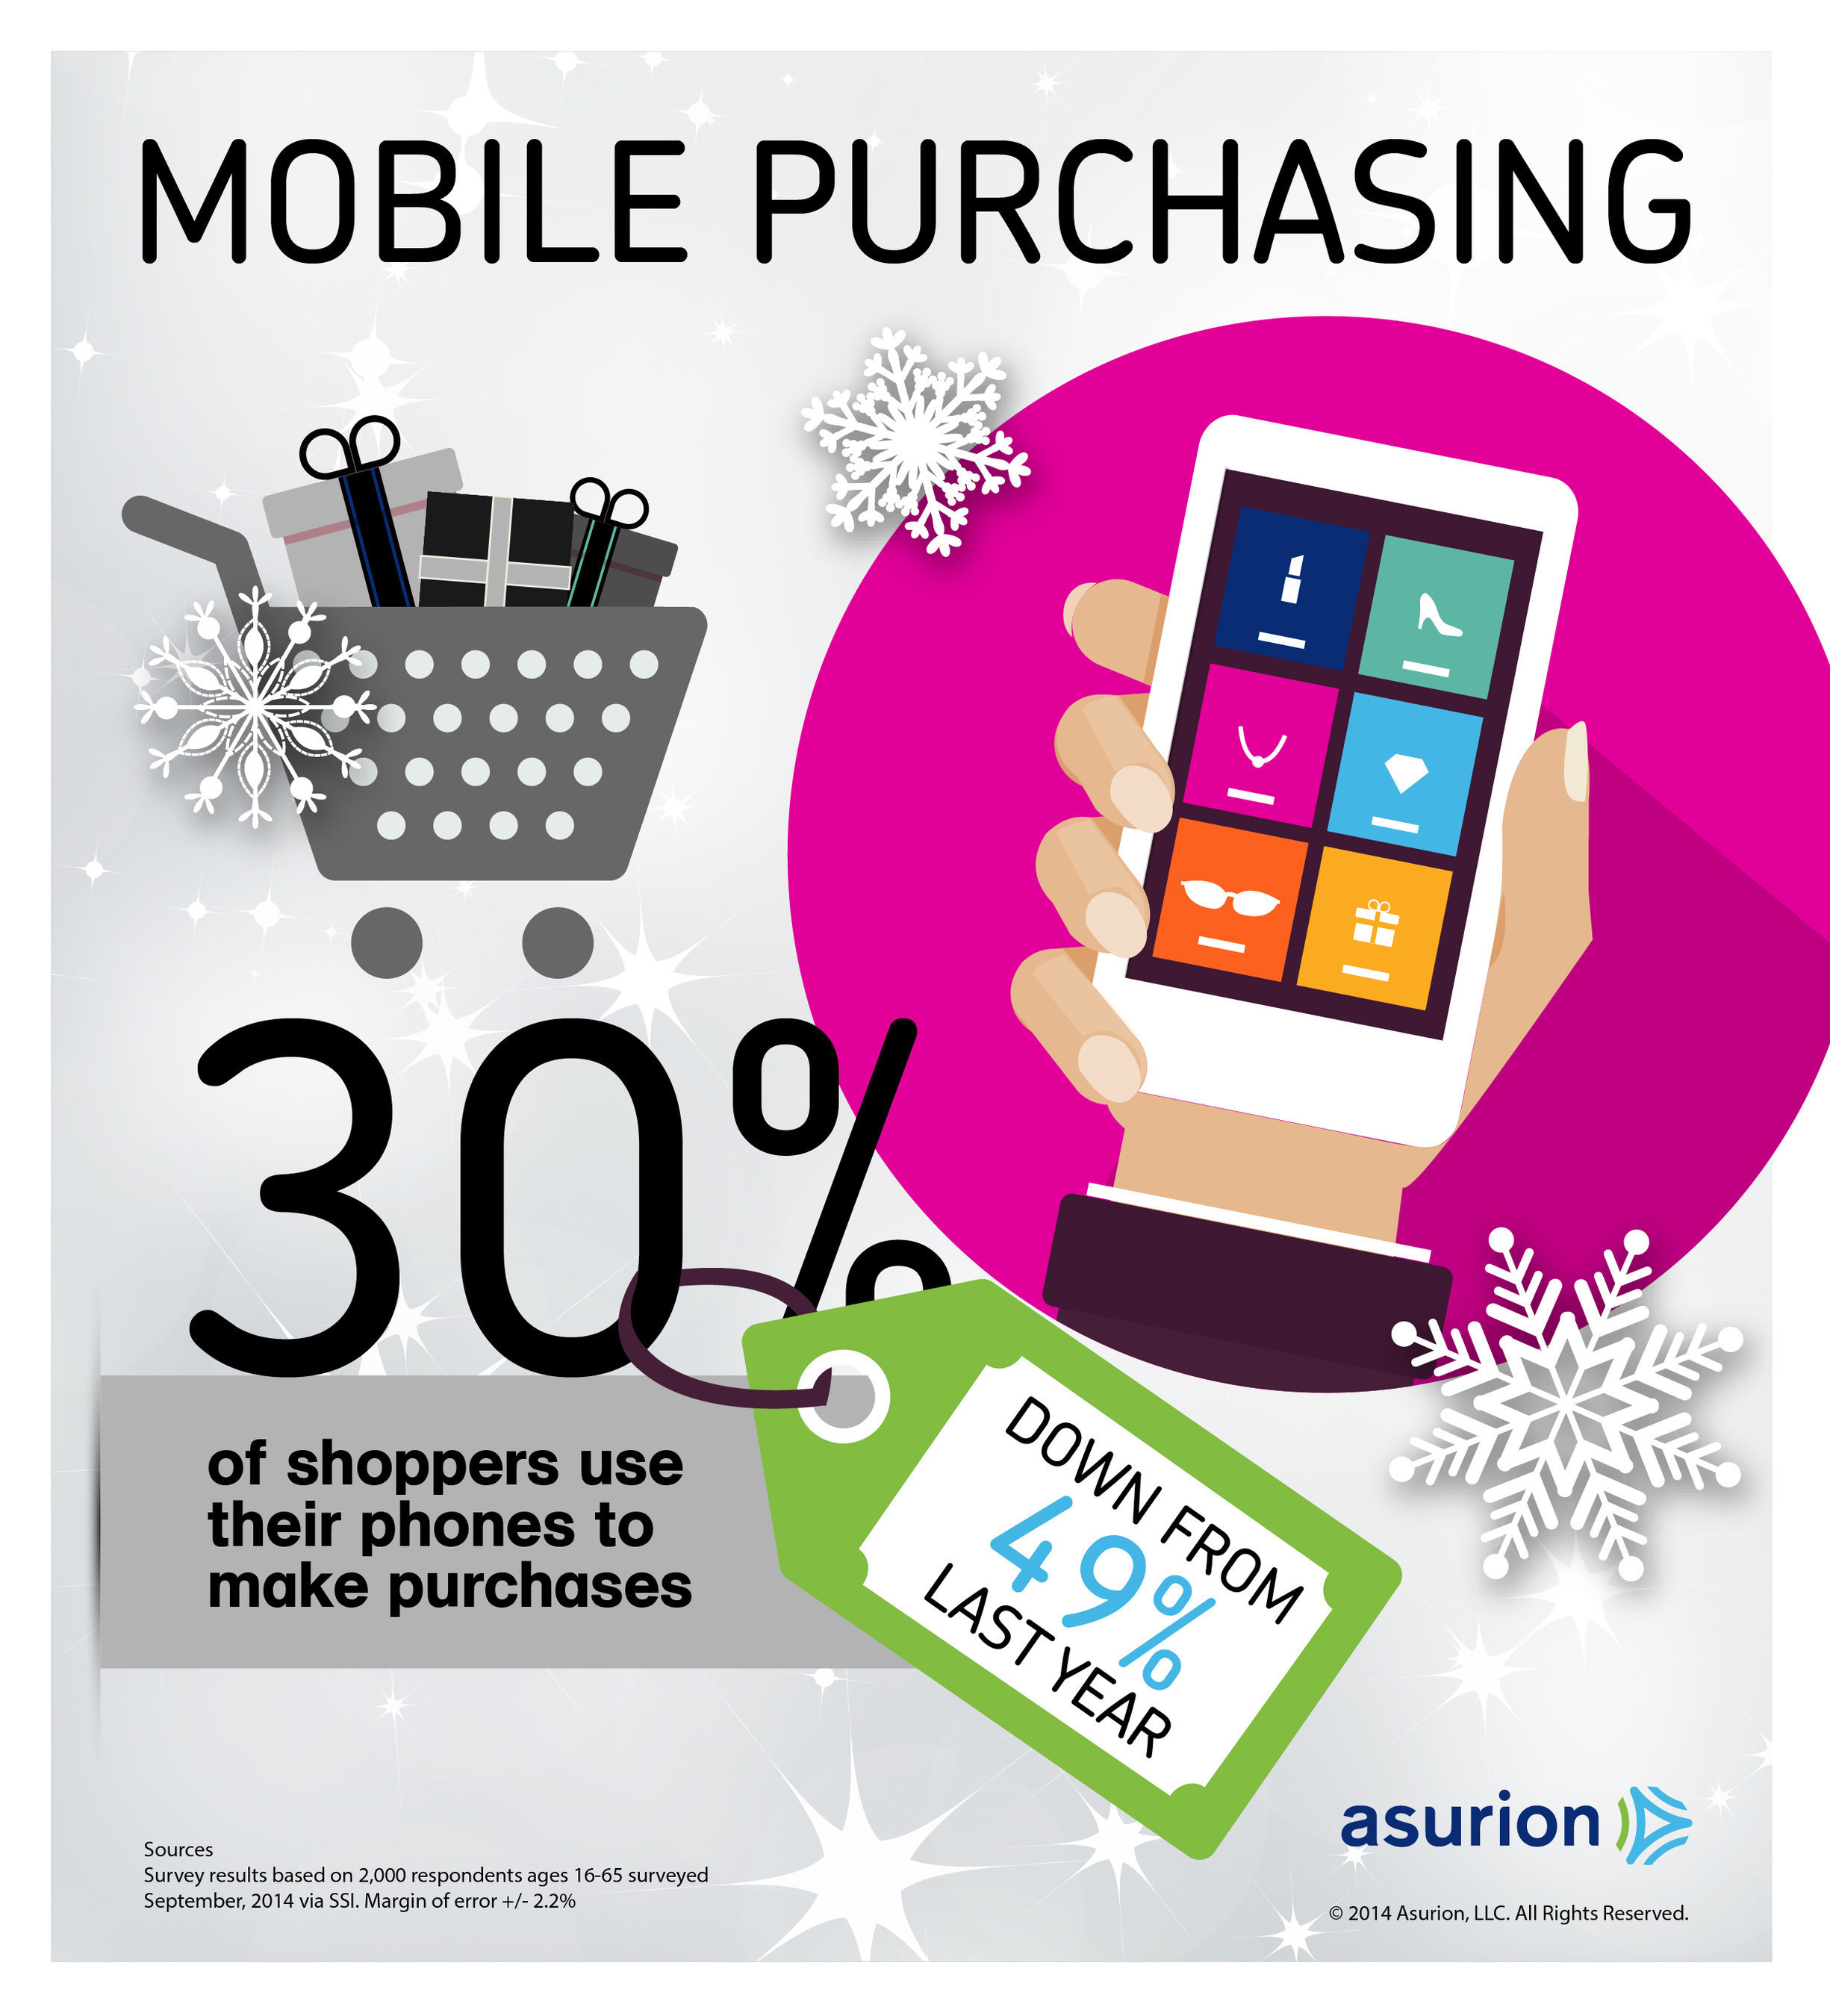 While nearly everyone (91 percent) plans to use their mobile phone or tablet , only 1 in 3 plan to use their phones to make purchases according to a new survey from product protection leader Asurion. That's a big drop from 1 in 2 last year. Find out more about holiday trends at http://blog.asurion.com/tag/holiday-2014/